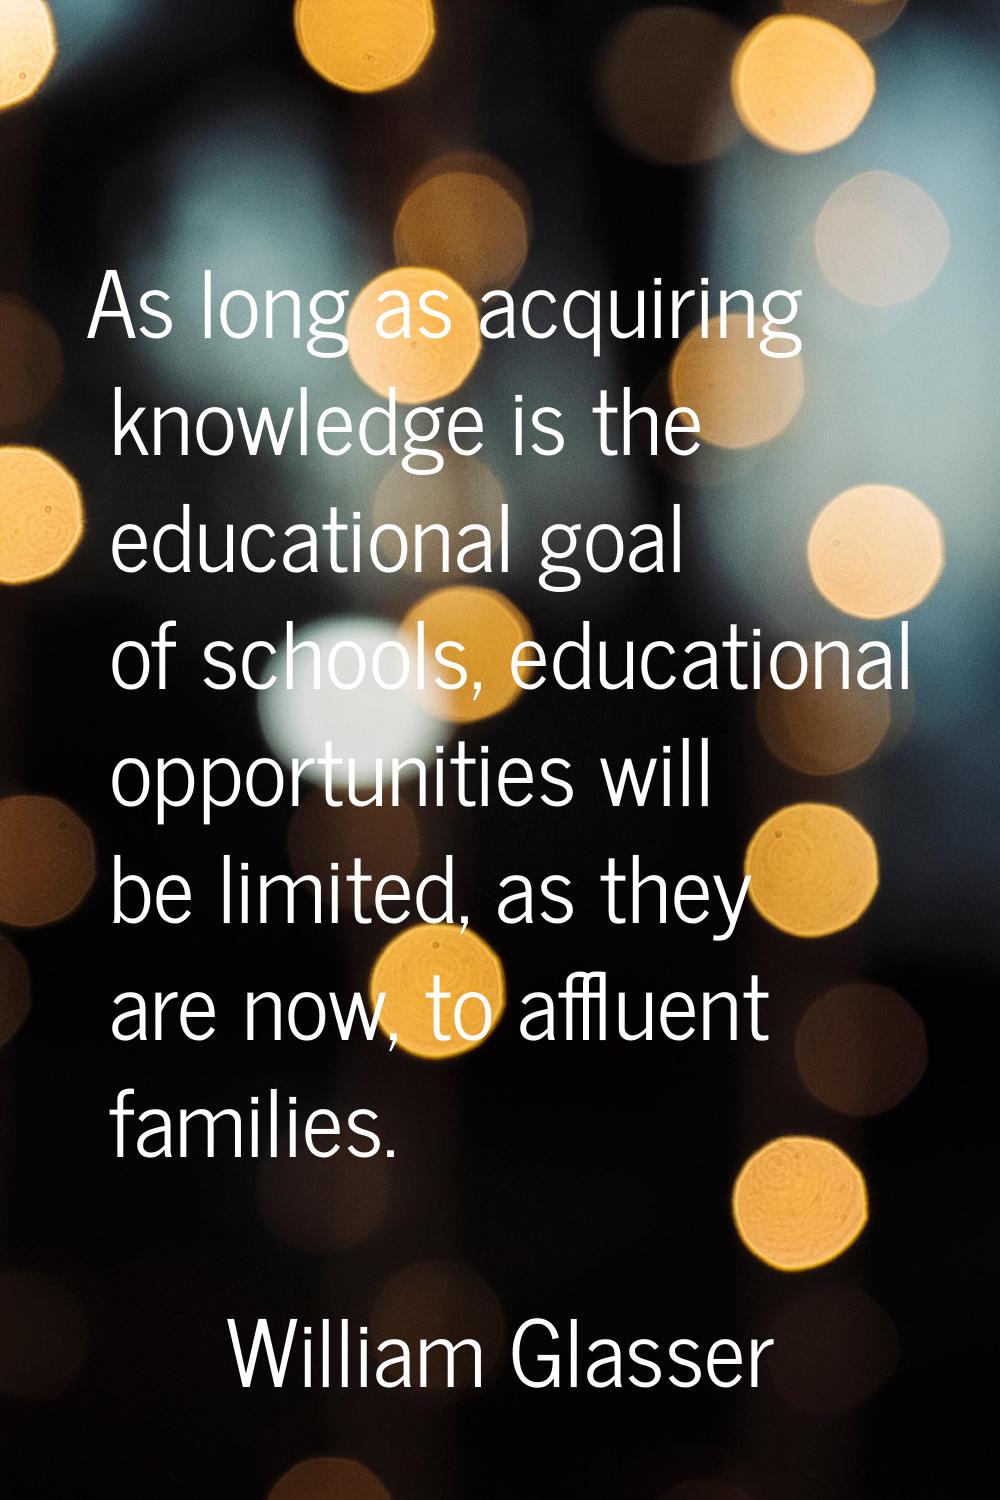 As long as acquiring knowledge is the educational goal of schools, educational opportunities will b